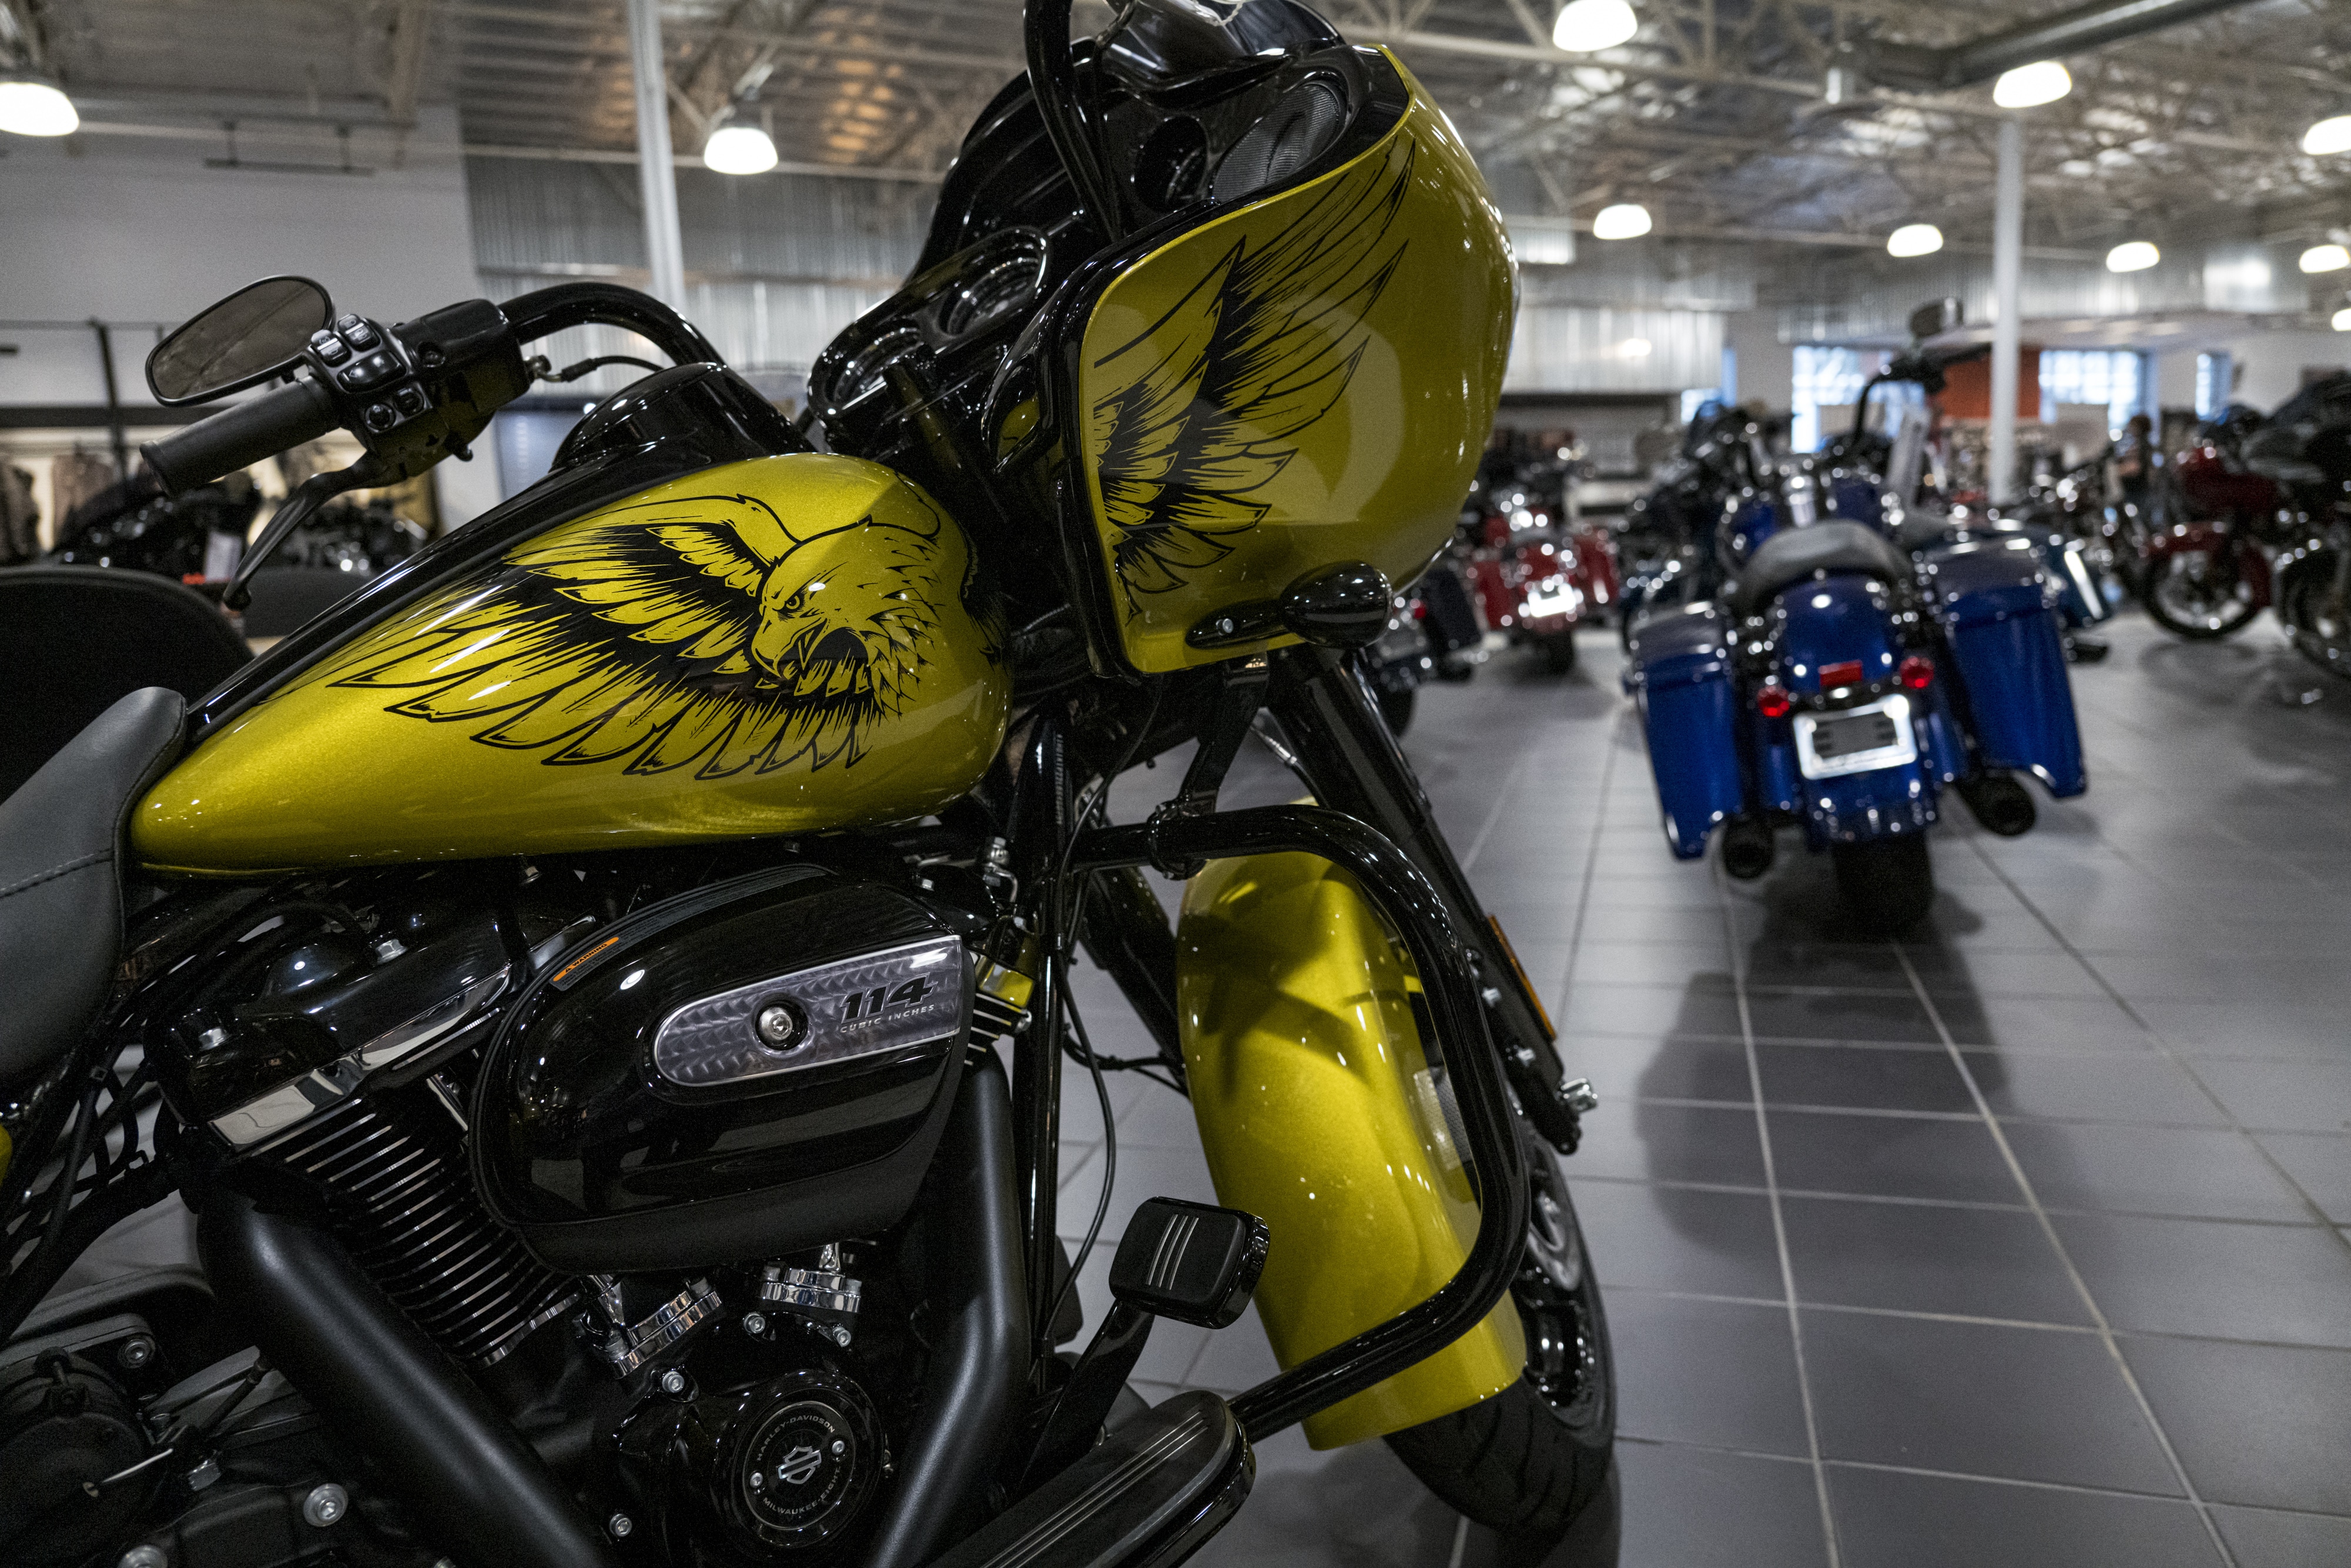 Harley-Davidson had had tough challenges but Covid-19-related factors have only increased difficulties for the company the world over.